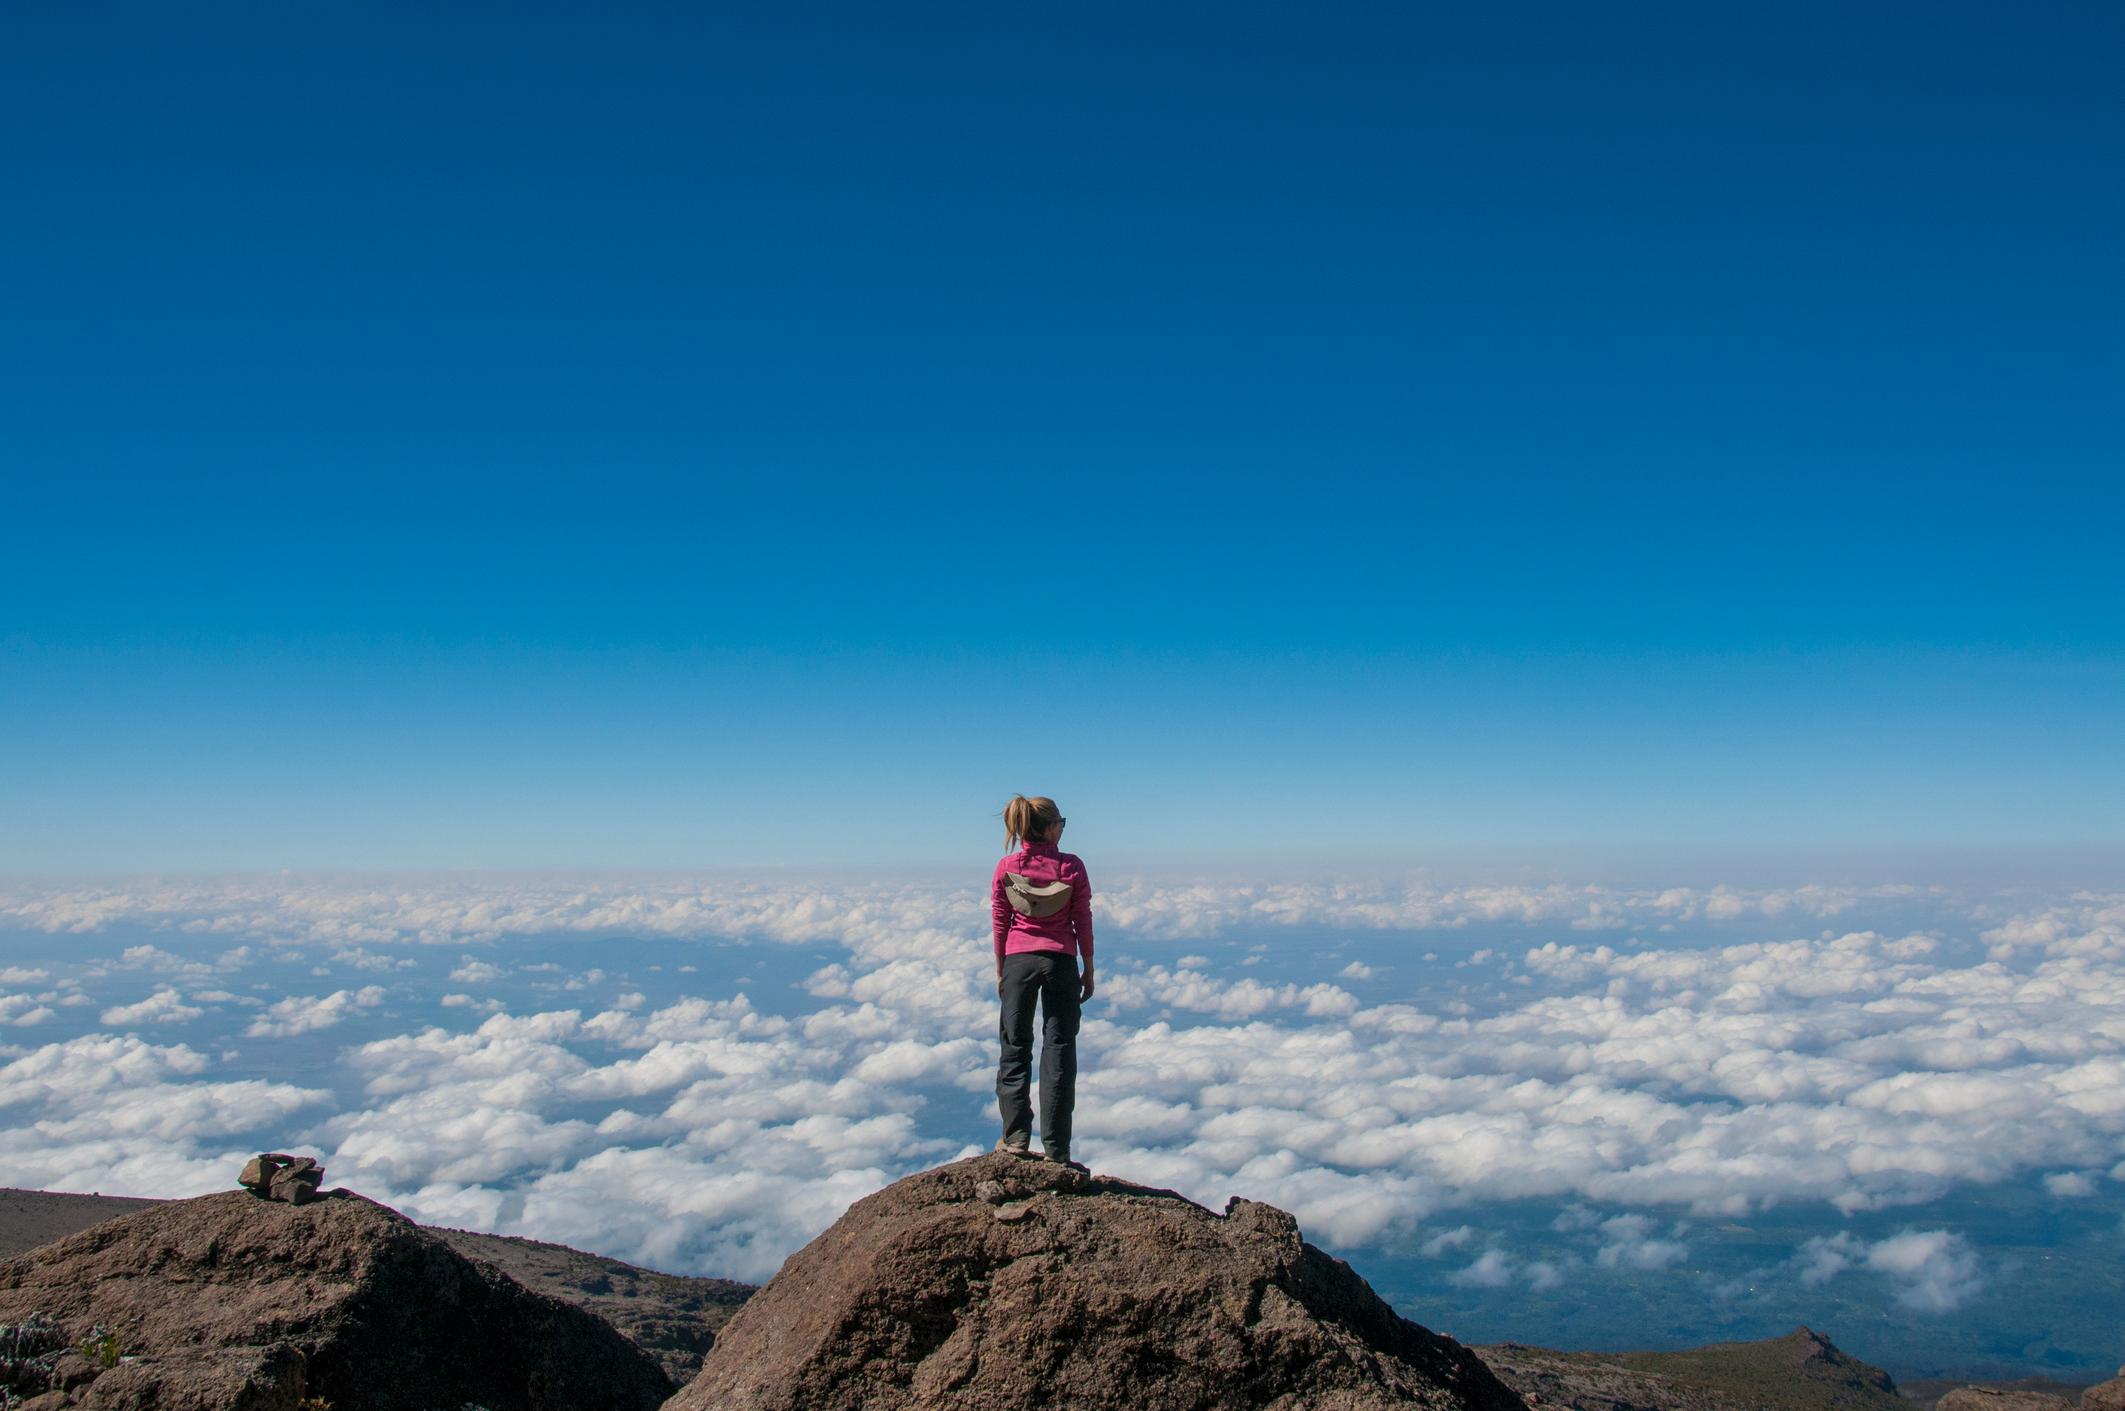 A woman looks out over a sea of clouds on Kilimanjaro summit.